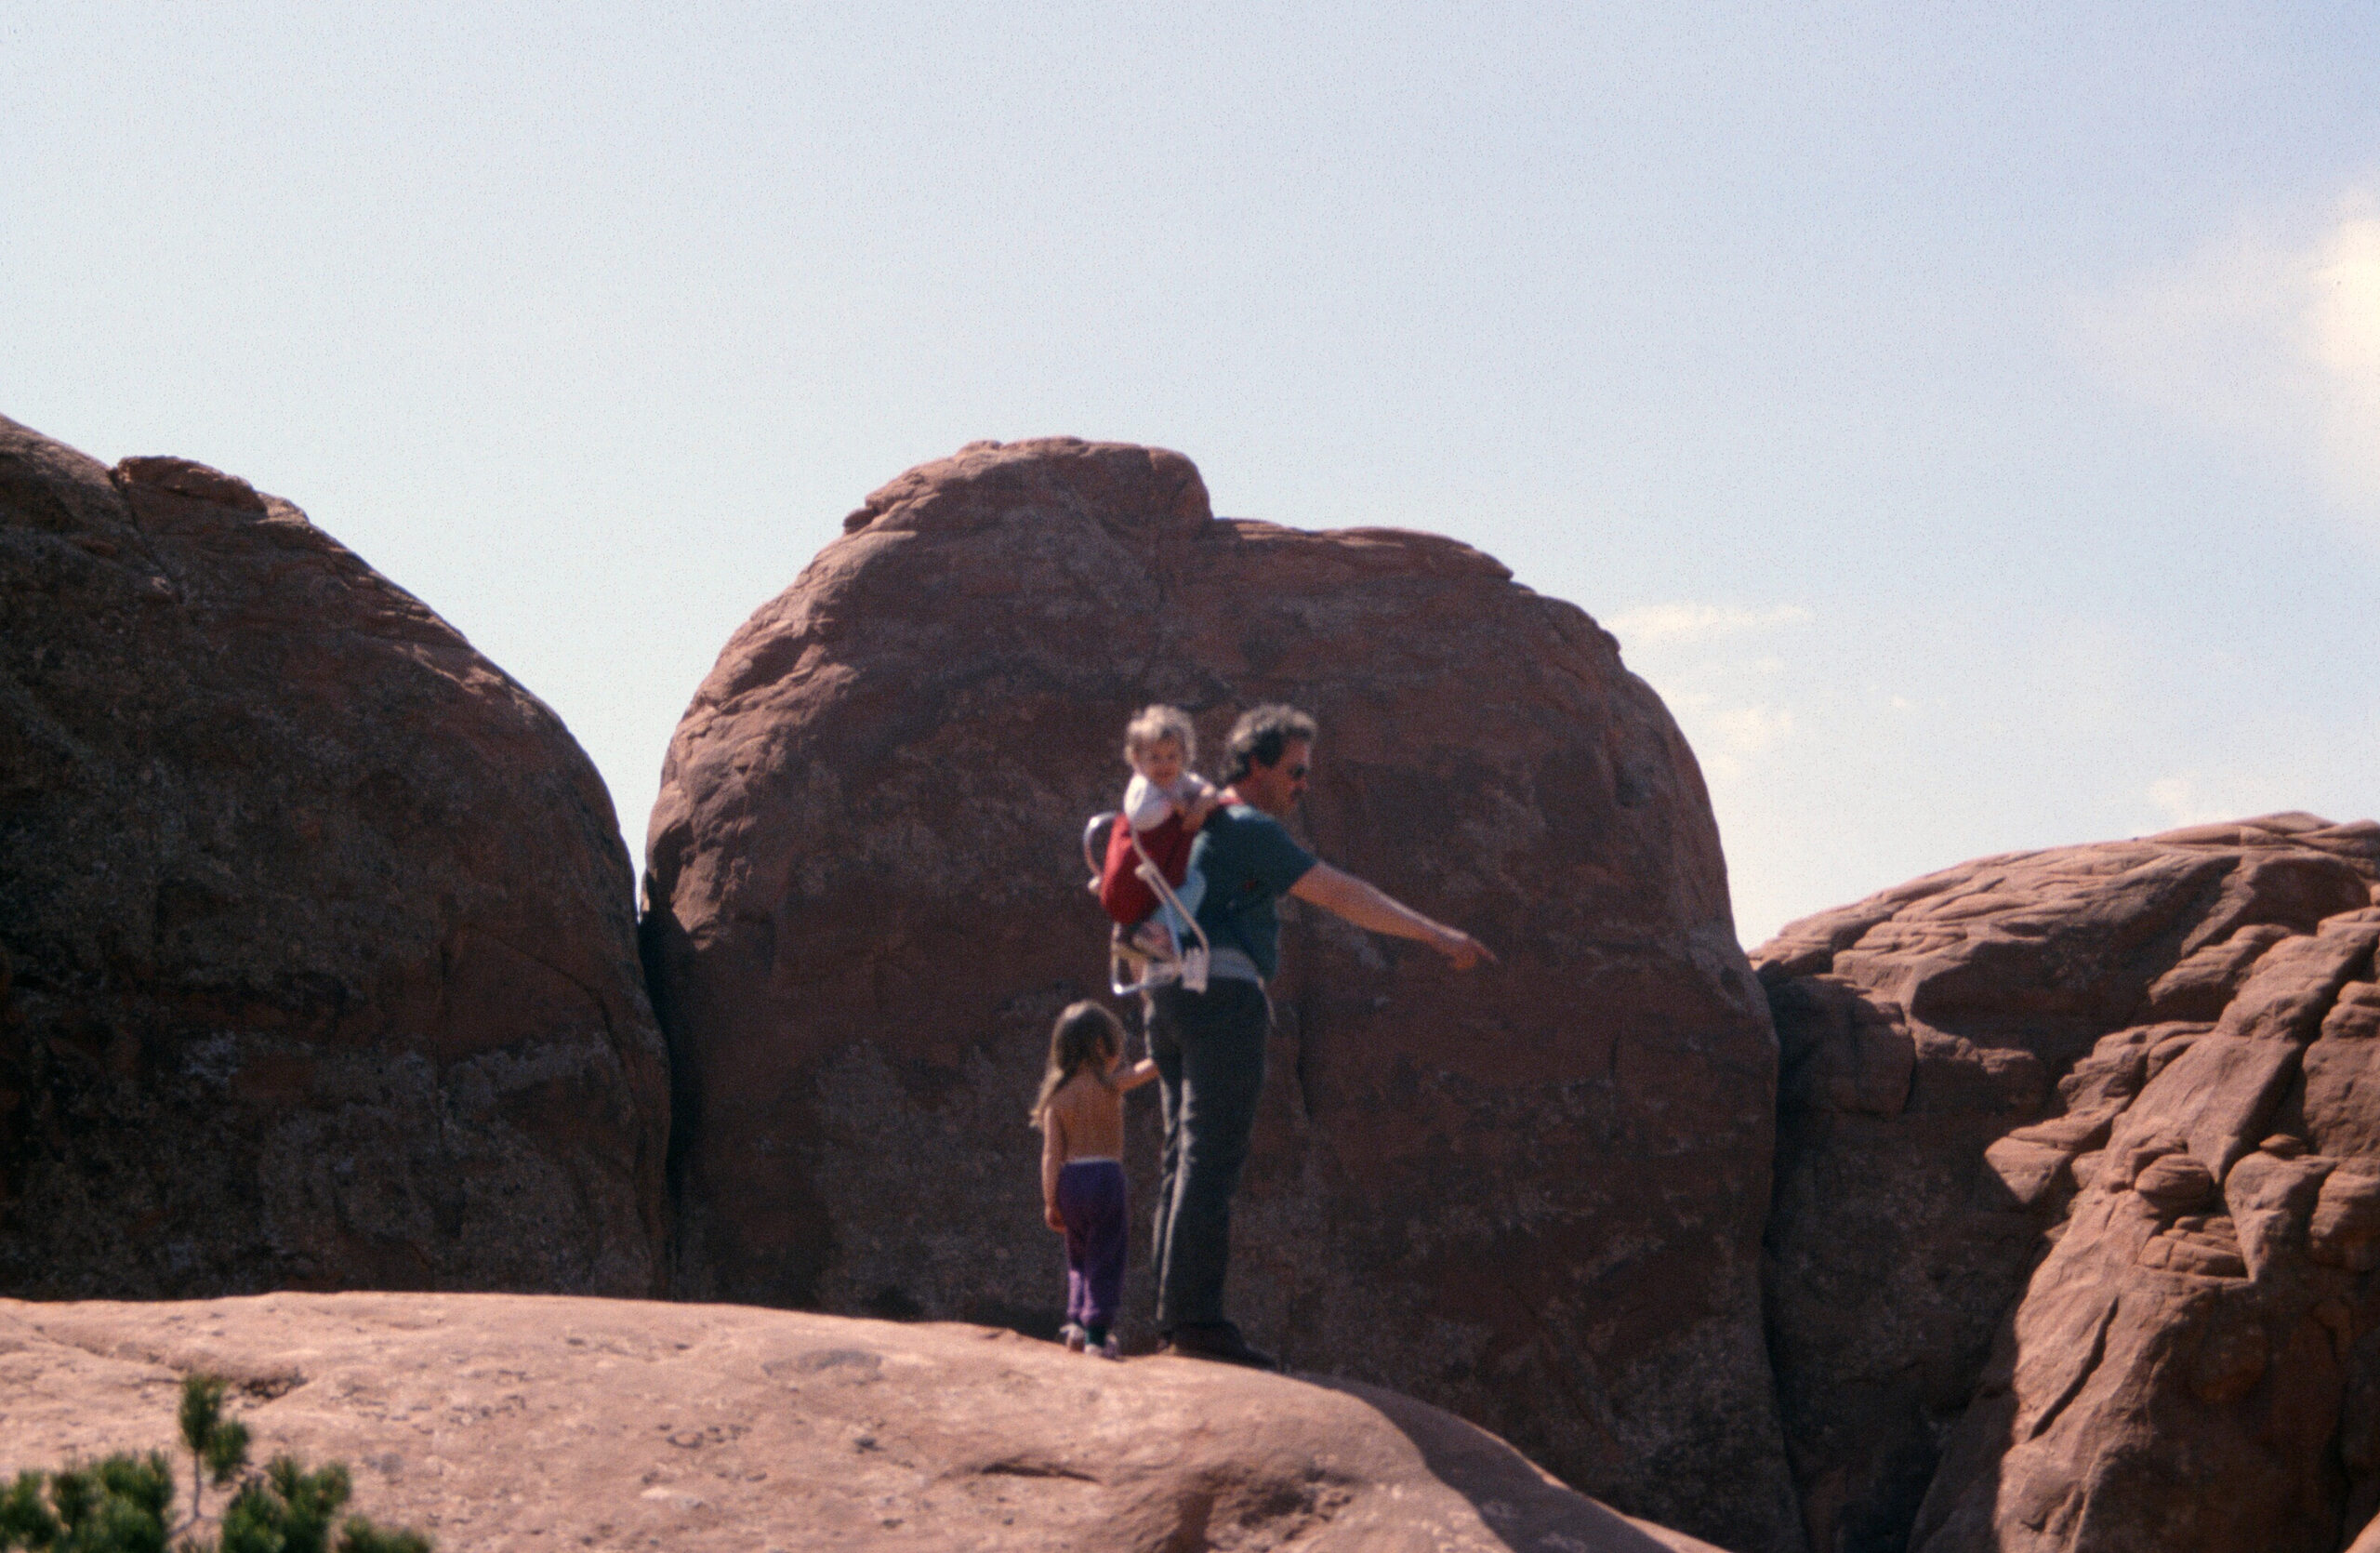 Man with two girls in a backpack in Arches national Park Utah 